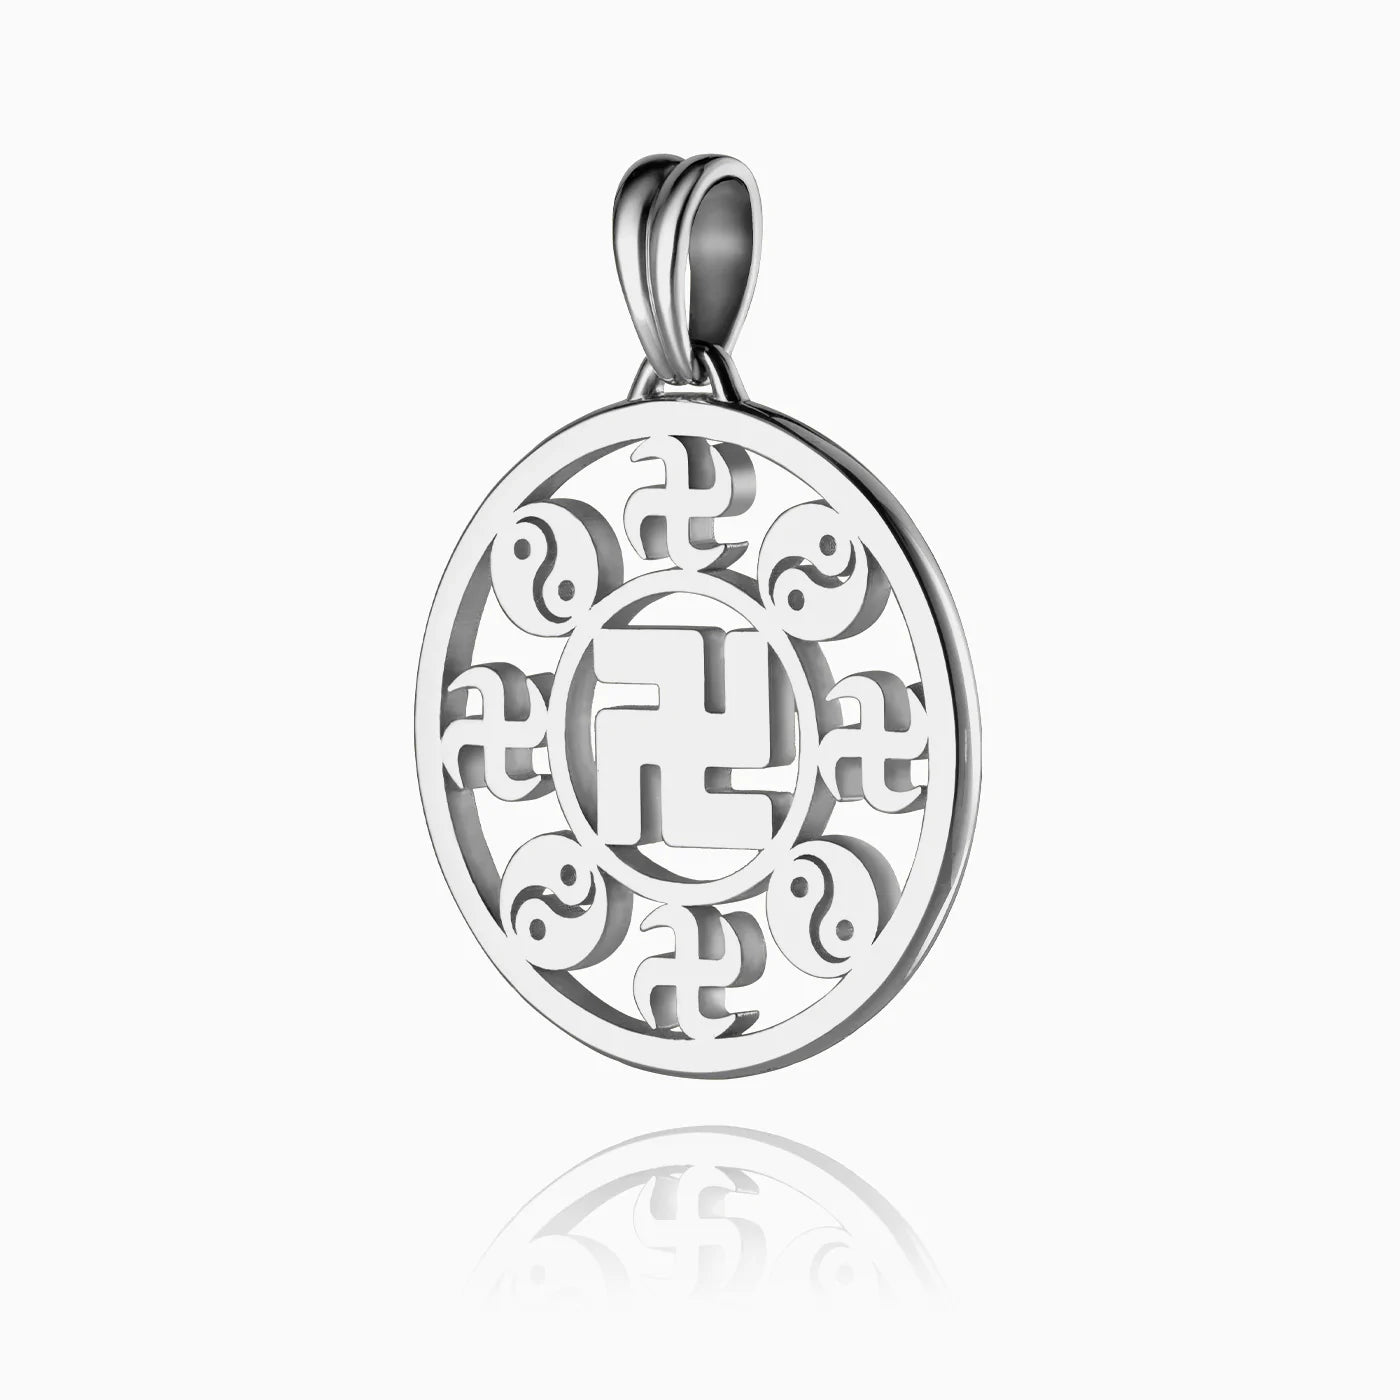 Falun Pendant - 18kt White Gold 25mm Without Chain